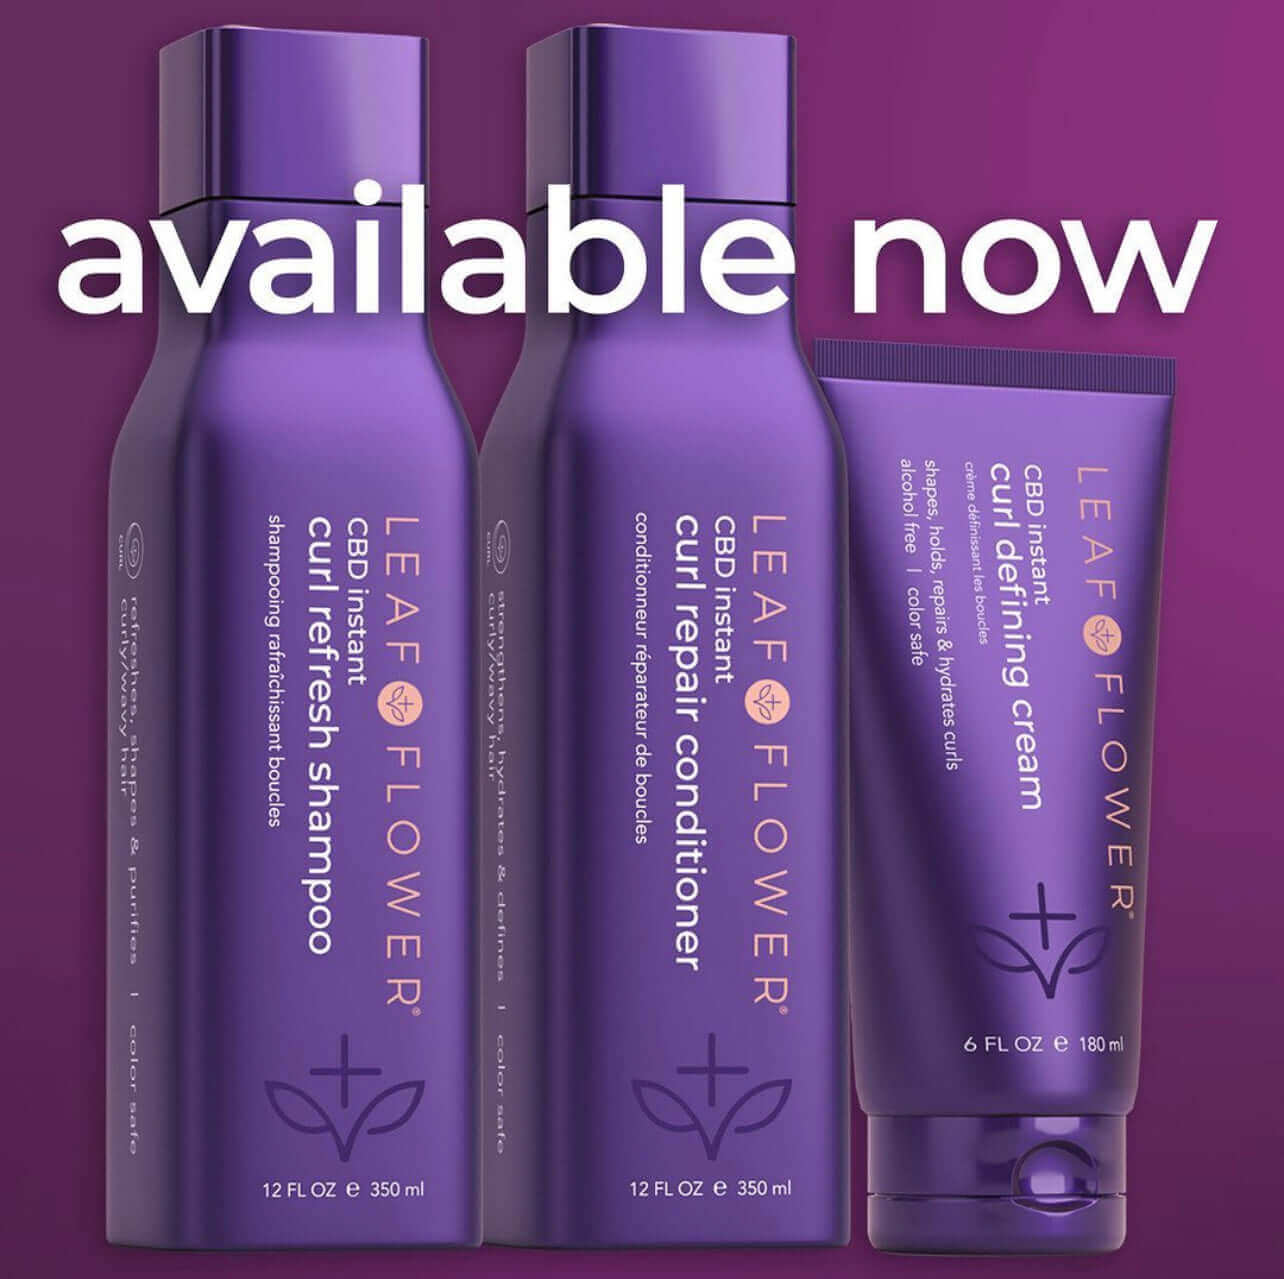 Three purple bottles of Leaf and Flower hair products on a purple background with the text "available now." The color-safe products include Leaf and Flower Instant Curl Refresh Shampoo, which gently removes build-up, Curl Repair Conditioner, and Curl Defining Cream for hydrated curls.